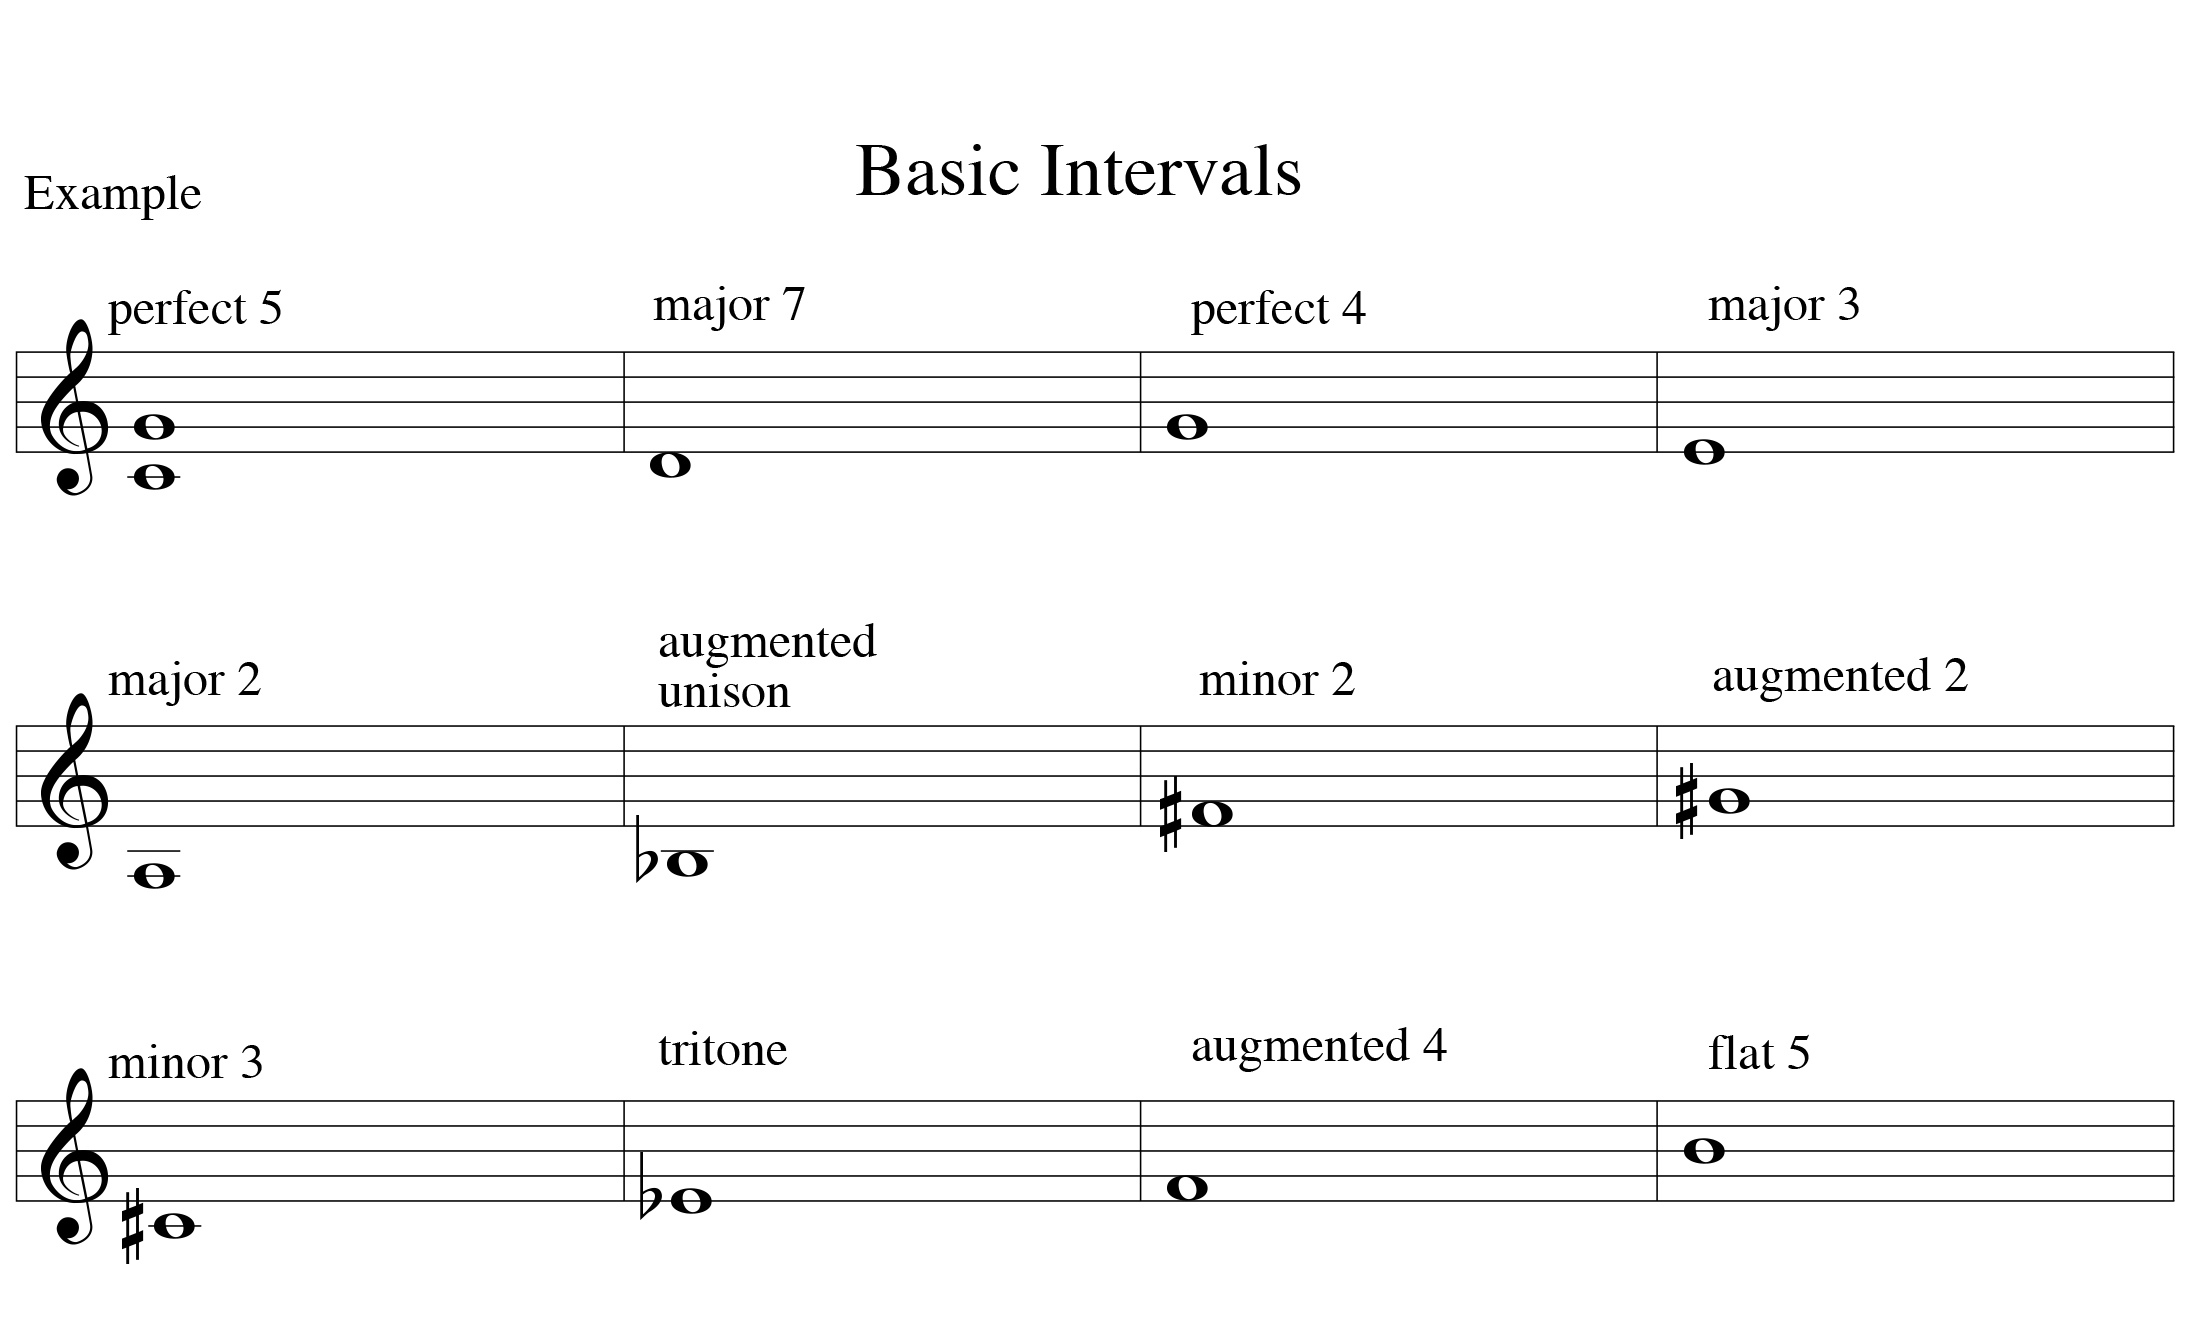 Music-Theory-Workbook-for-all-instruments-by-bruce-arnold-for-muse-eek.com-basic-interval-exercise-Crop